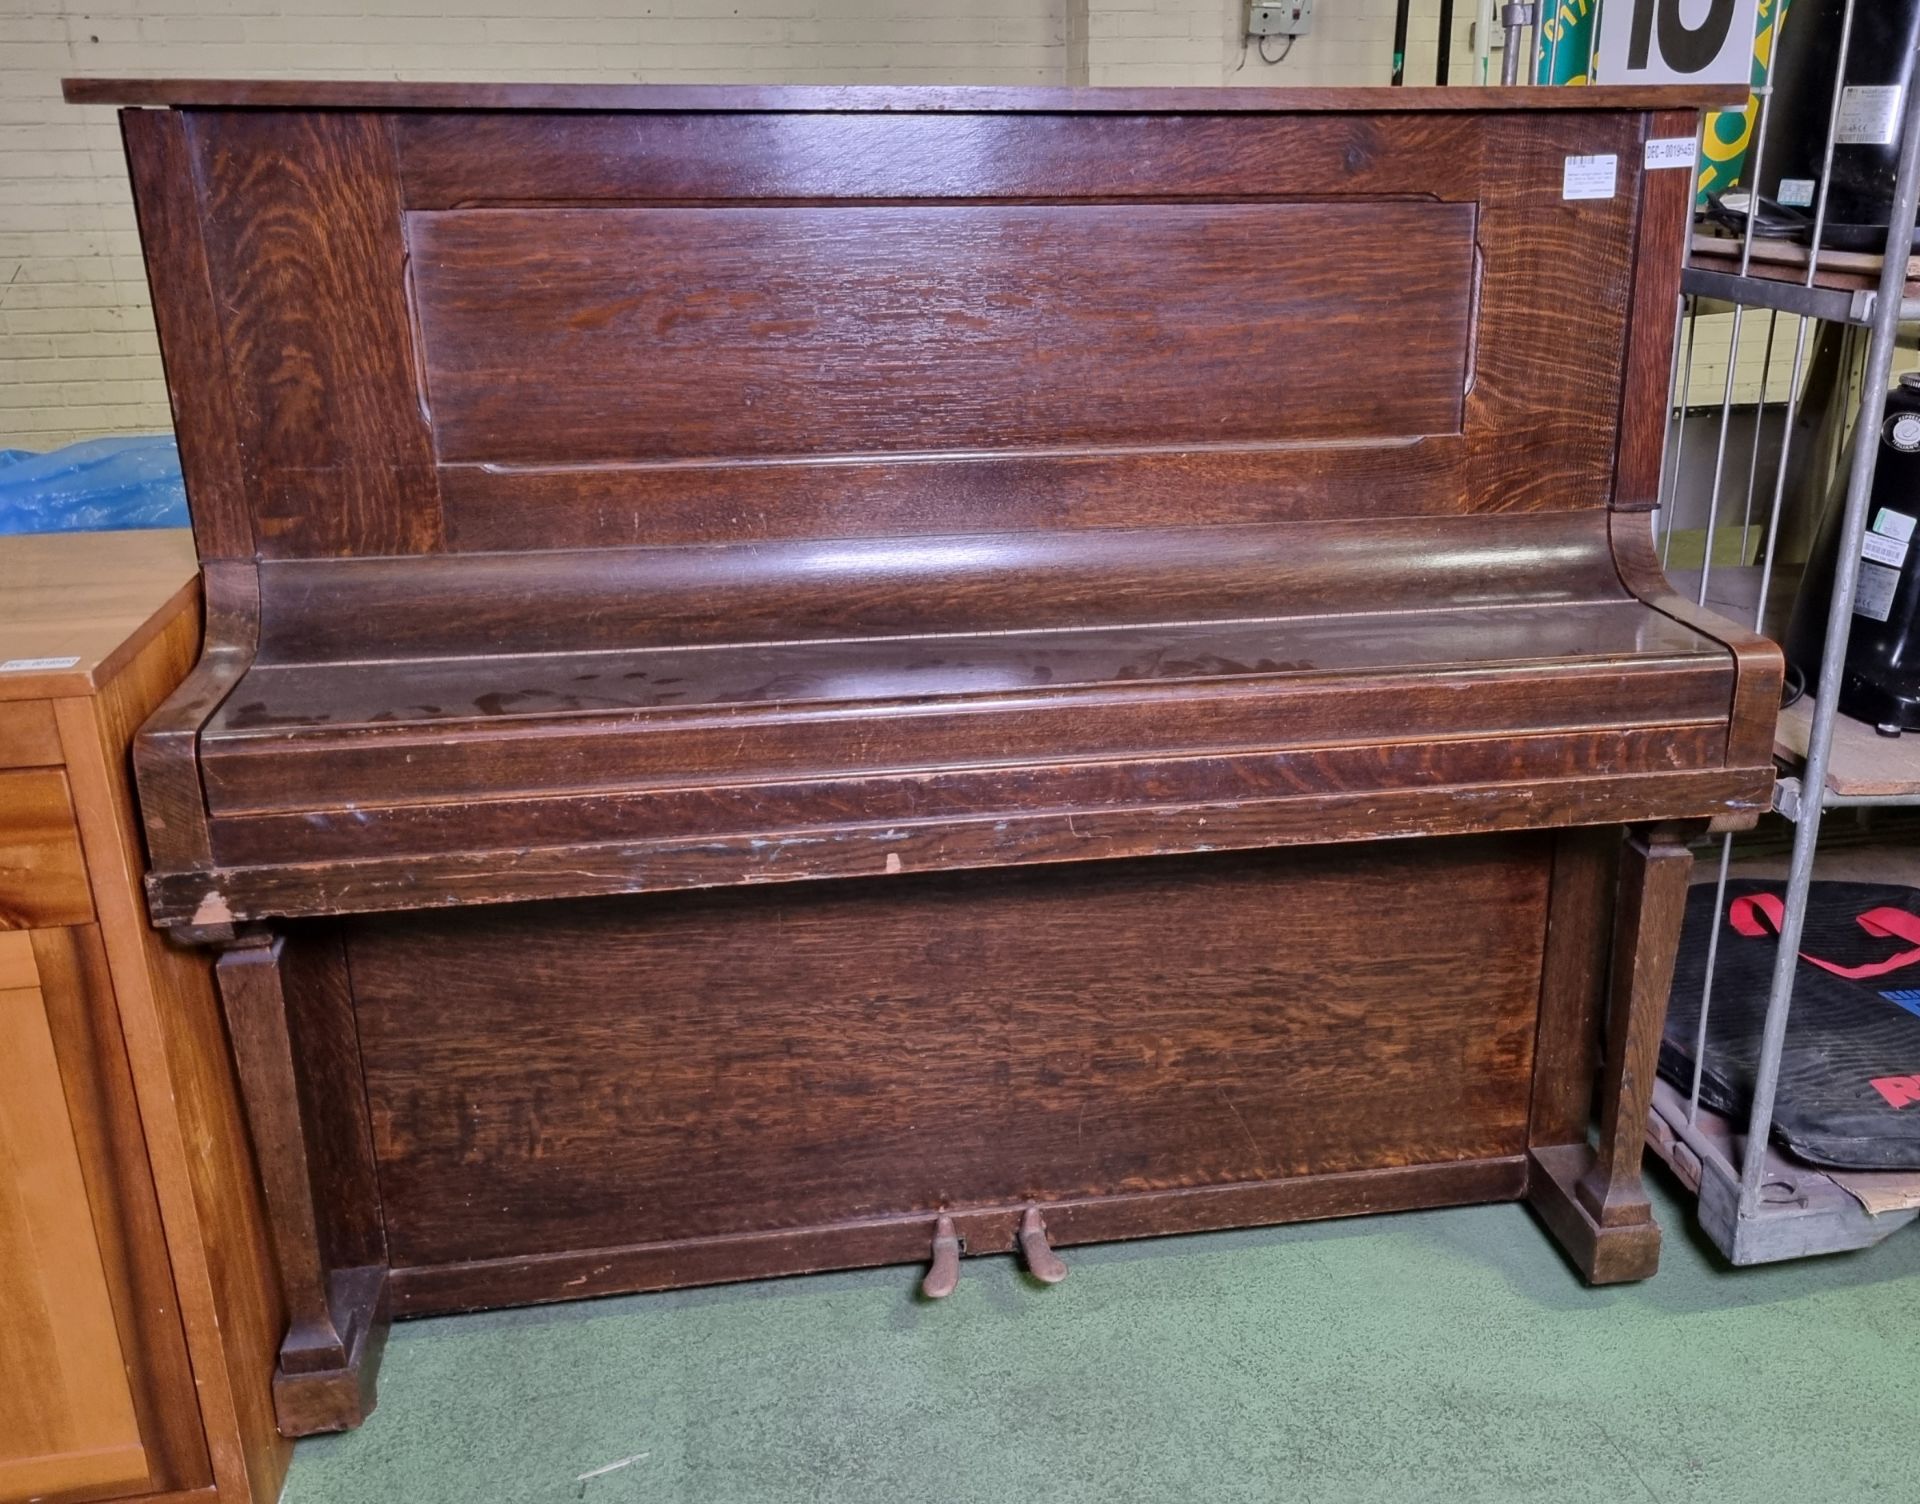 Benson upright piano - Serial No: 3633 or 3623 - W 1450 x D 600 x H 1250mm